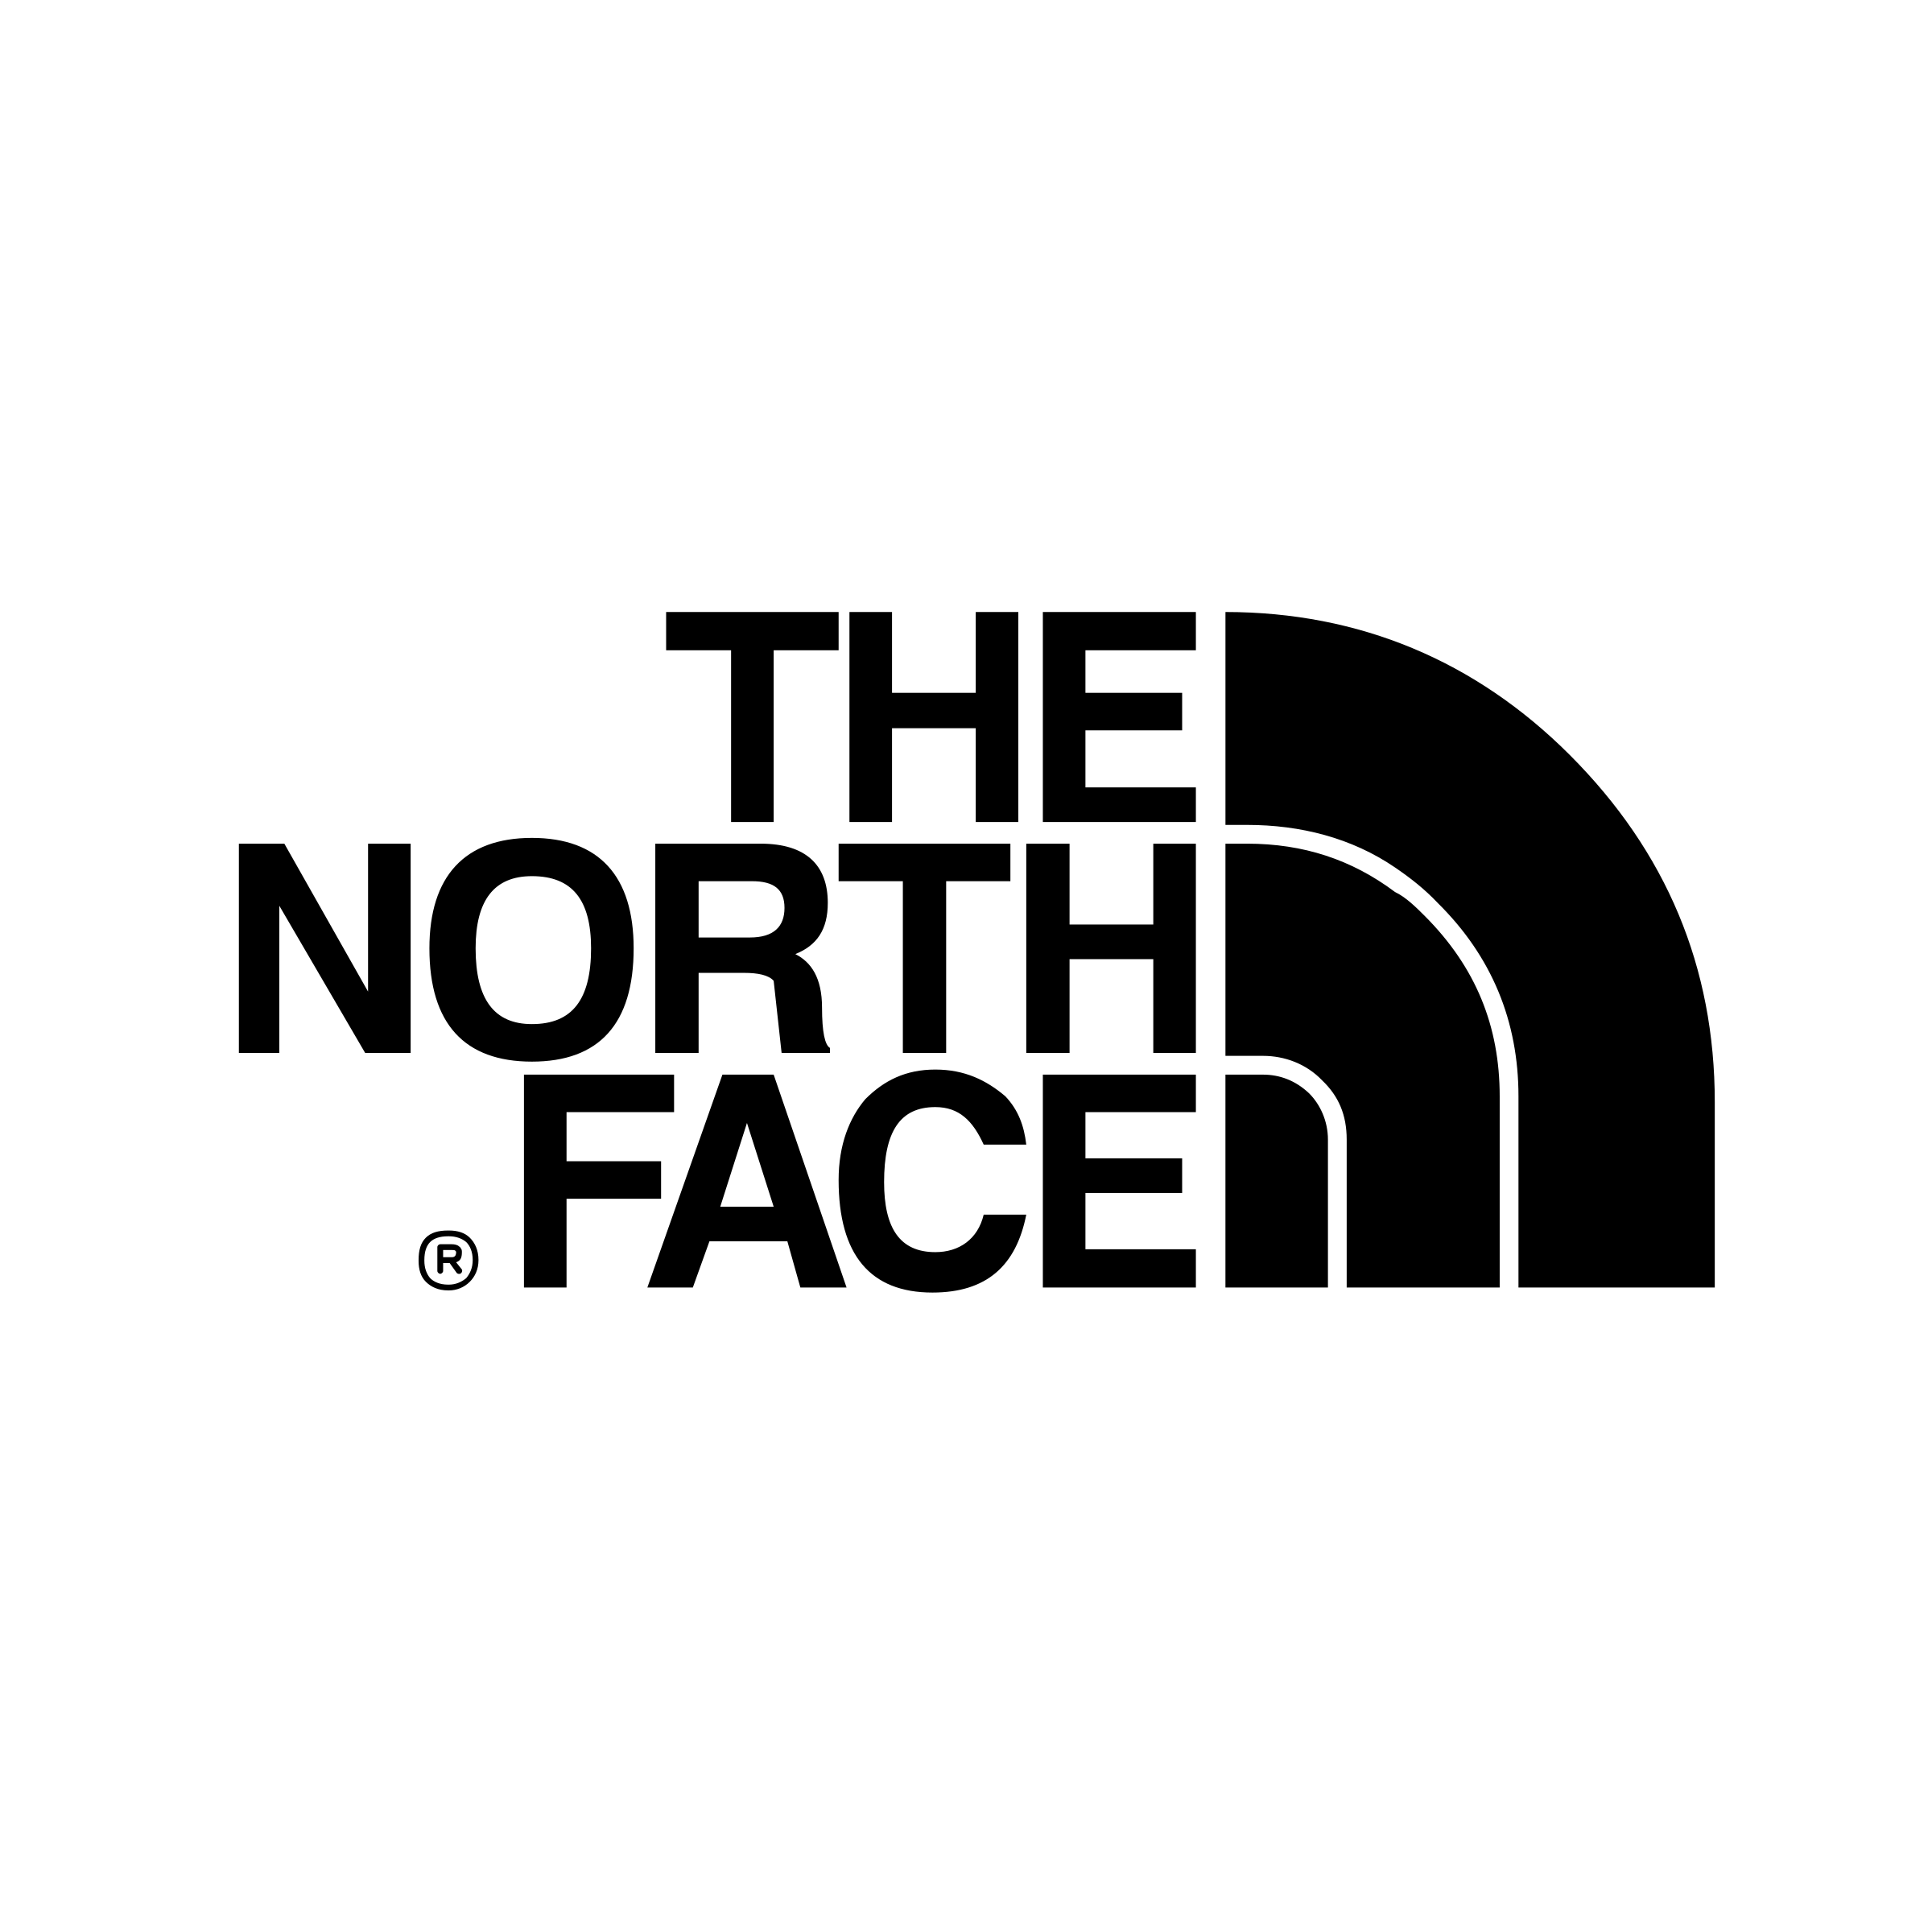 the-north-face-1-logo-black-and-white.png